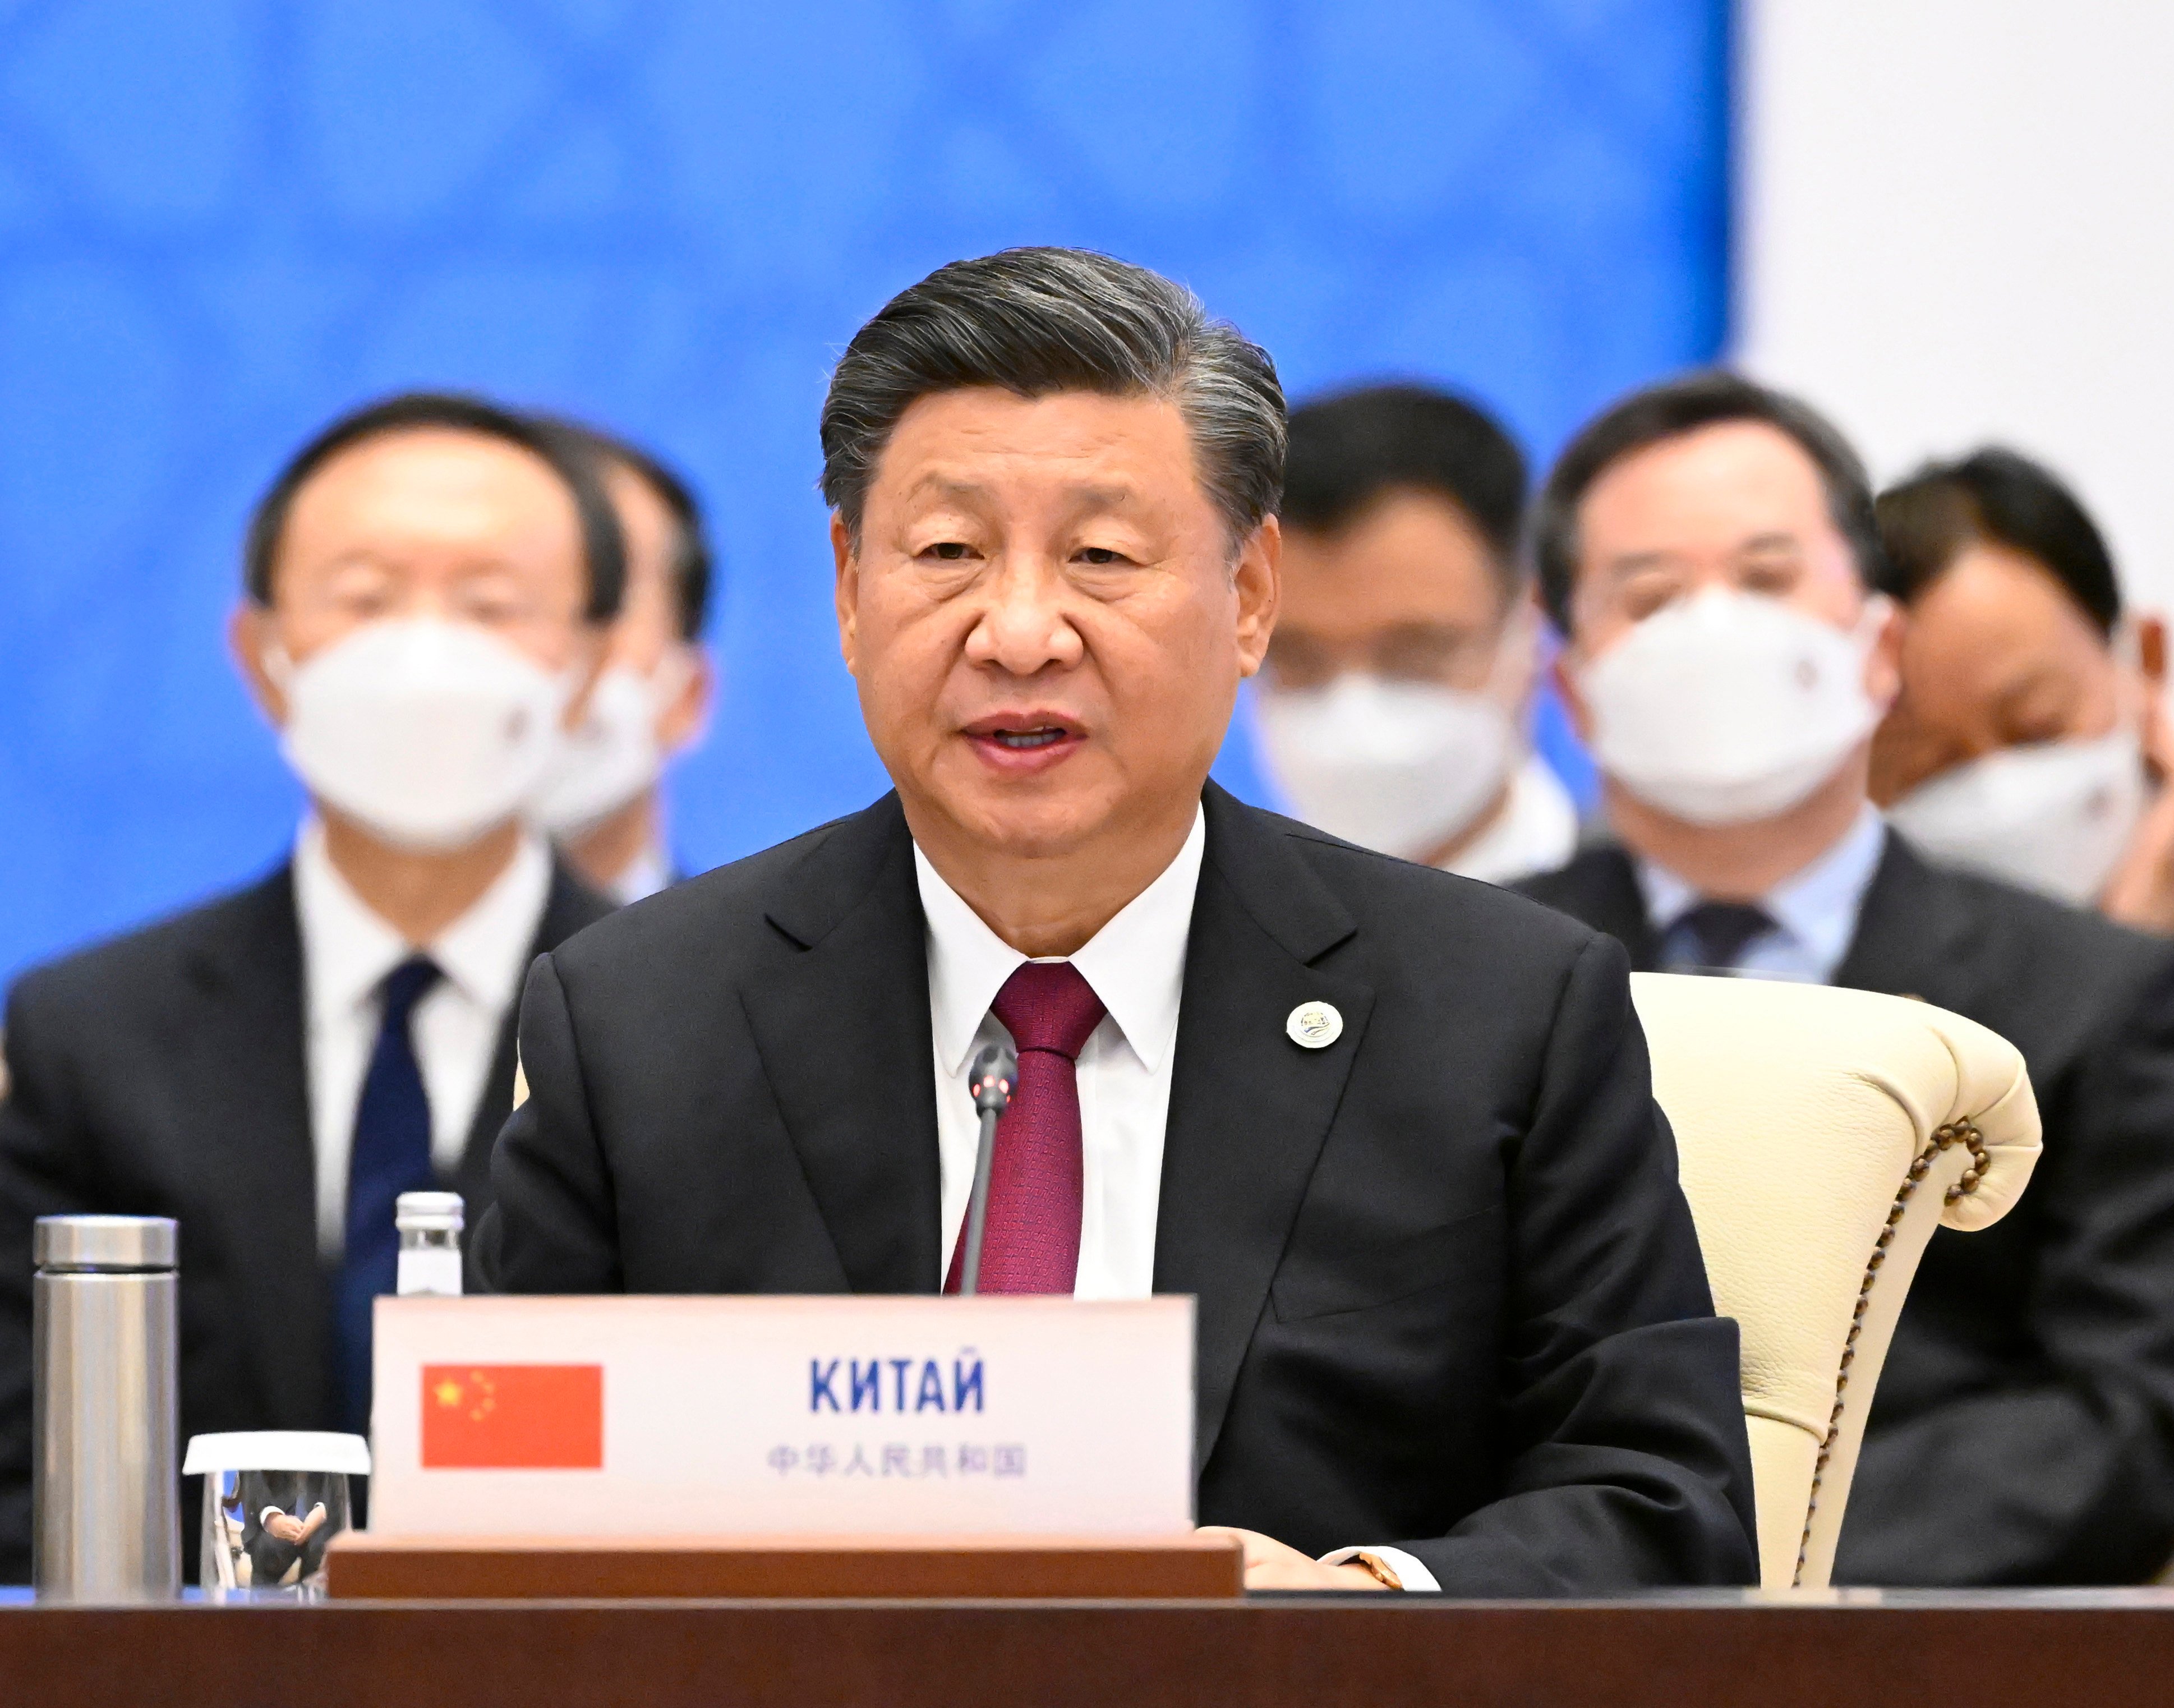 Chinese President Xi Jinping attends the 22nd meeting of the Council of Heads of State of the Shanghai Cooperation Organisation in Uzbekistan on September 16. Photo: Xinhua